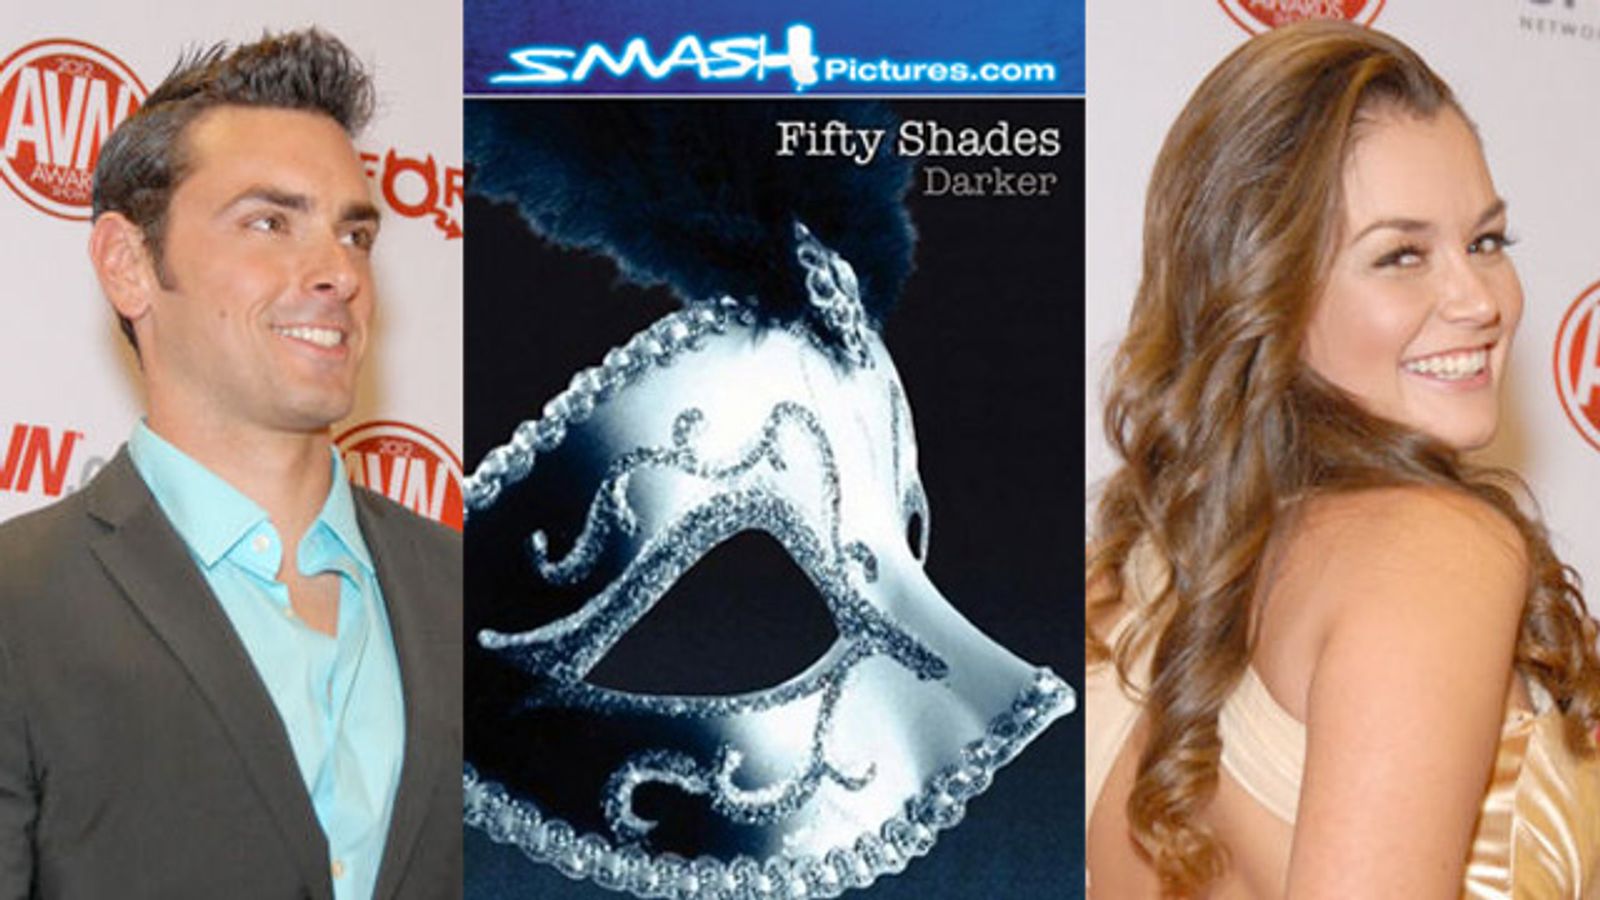 Haze, Driller Land Leads in Smash's 'Fifty Shades' - UPDATE